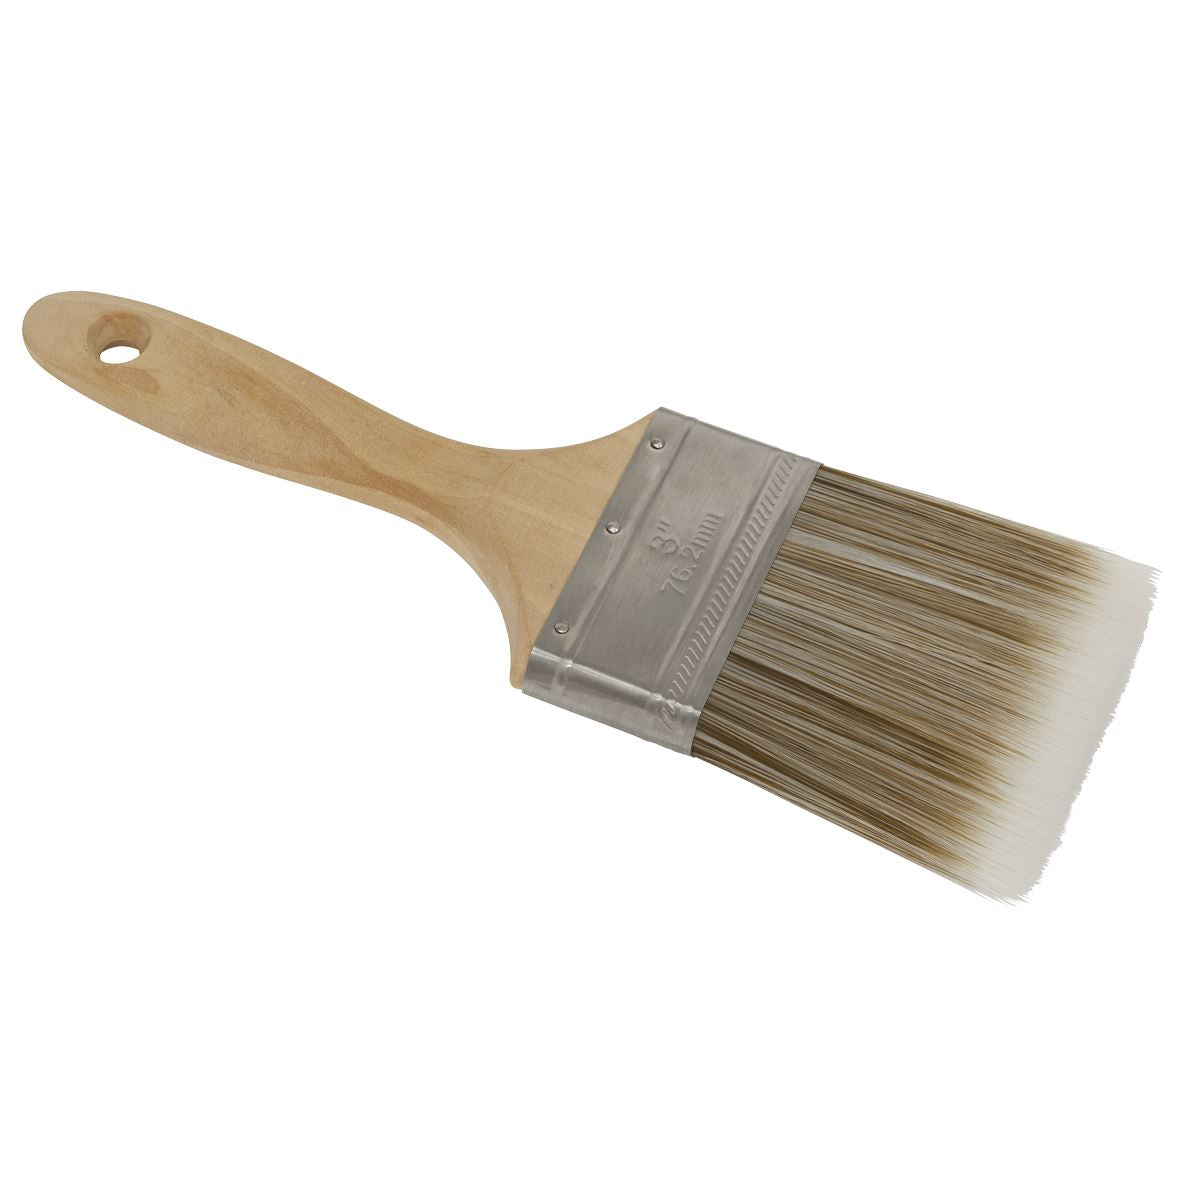 Sealey Wooden Handle Paint Brush 76mm